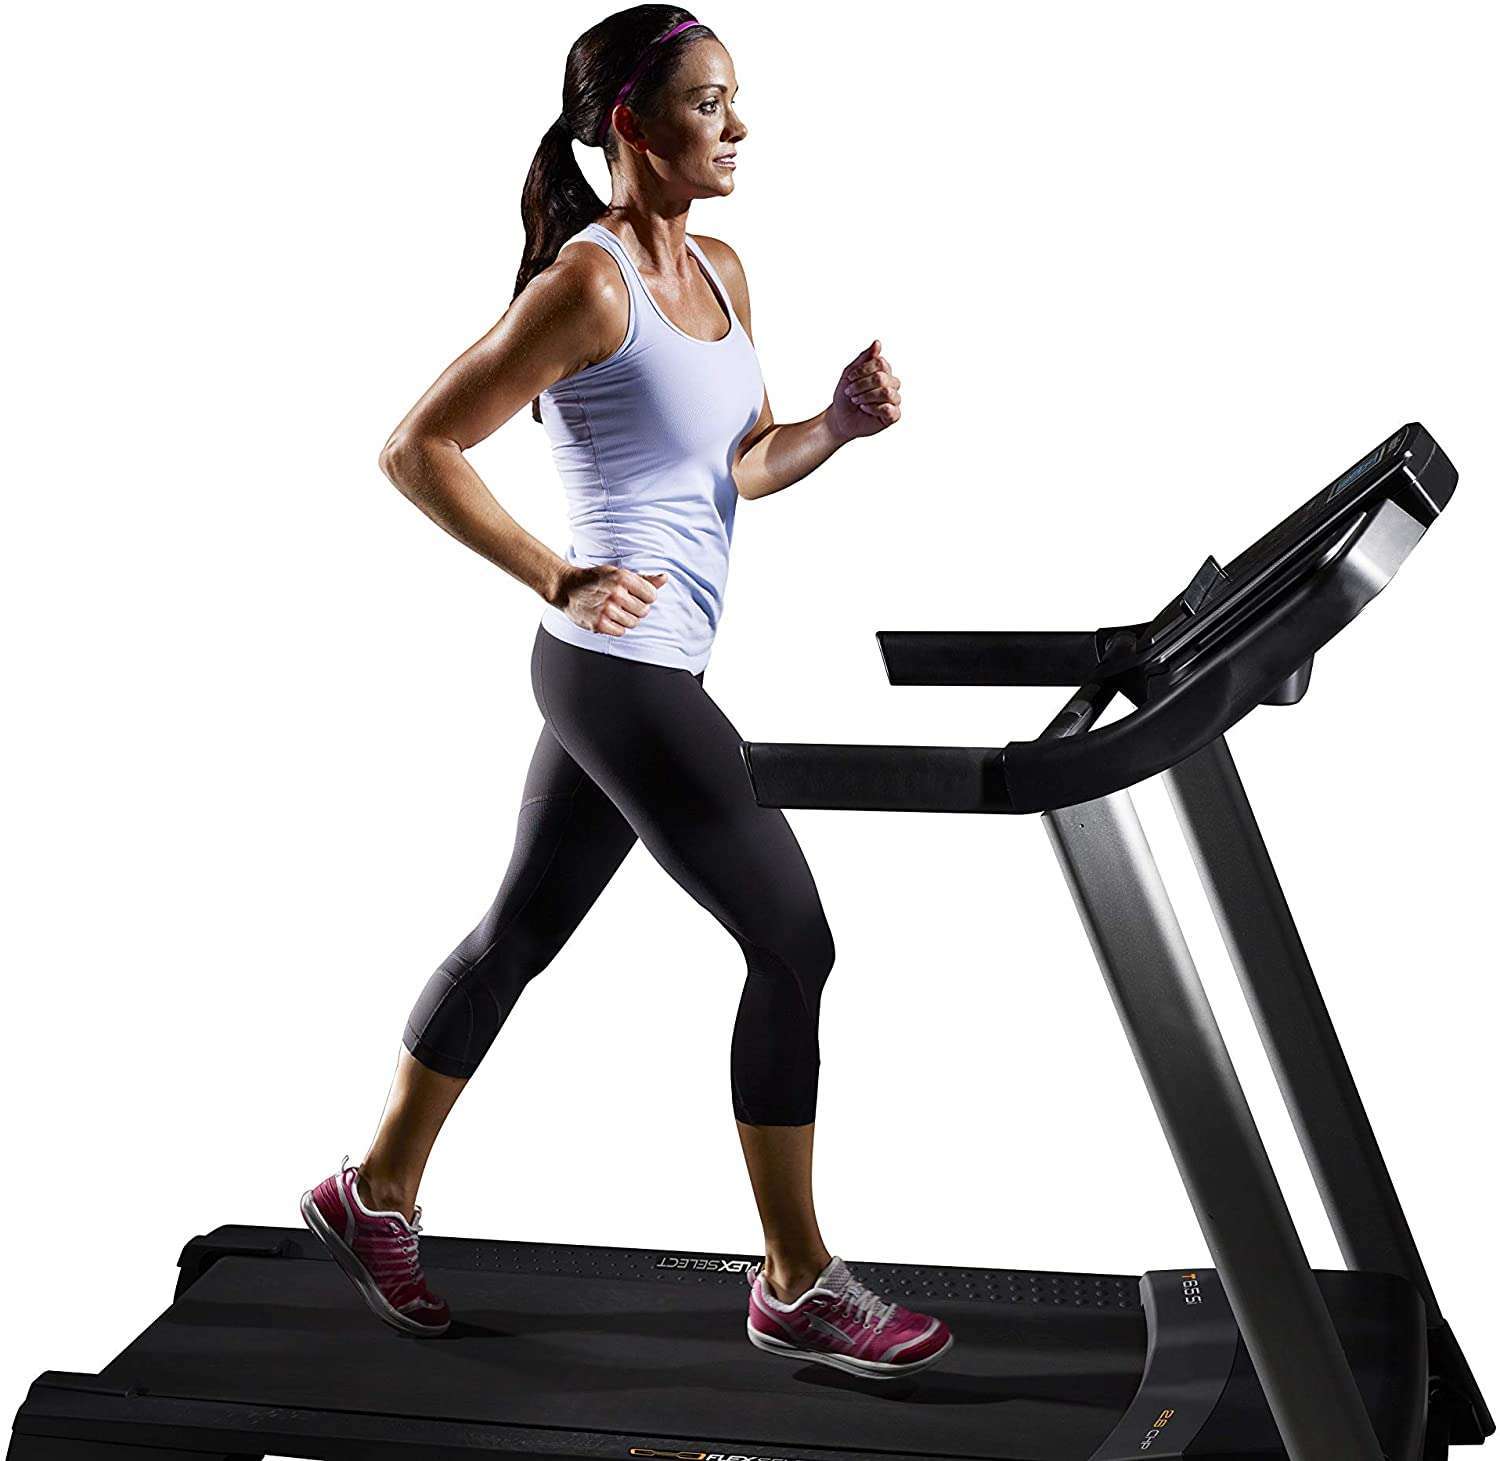 What is the Best Exercise Machine for Bad Knees? Let